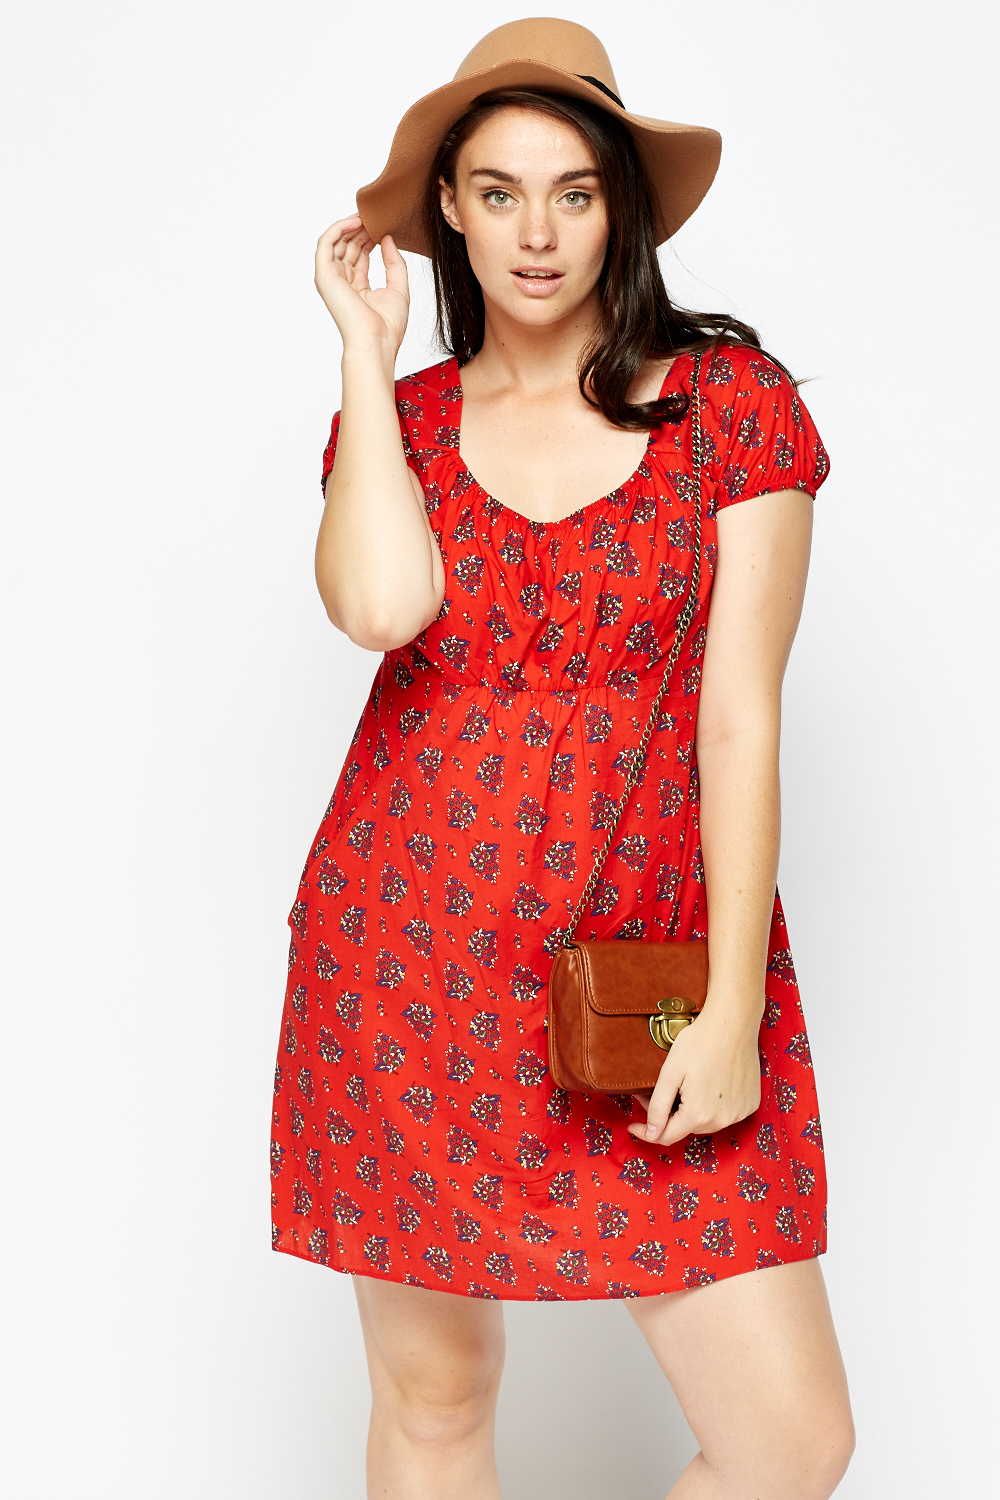 Red Flow Dress - Just $7